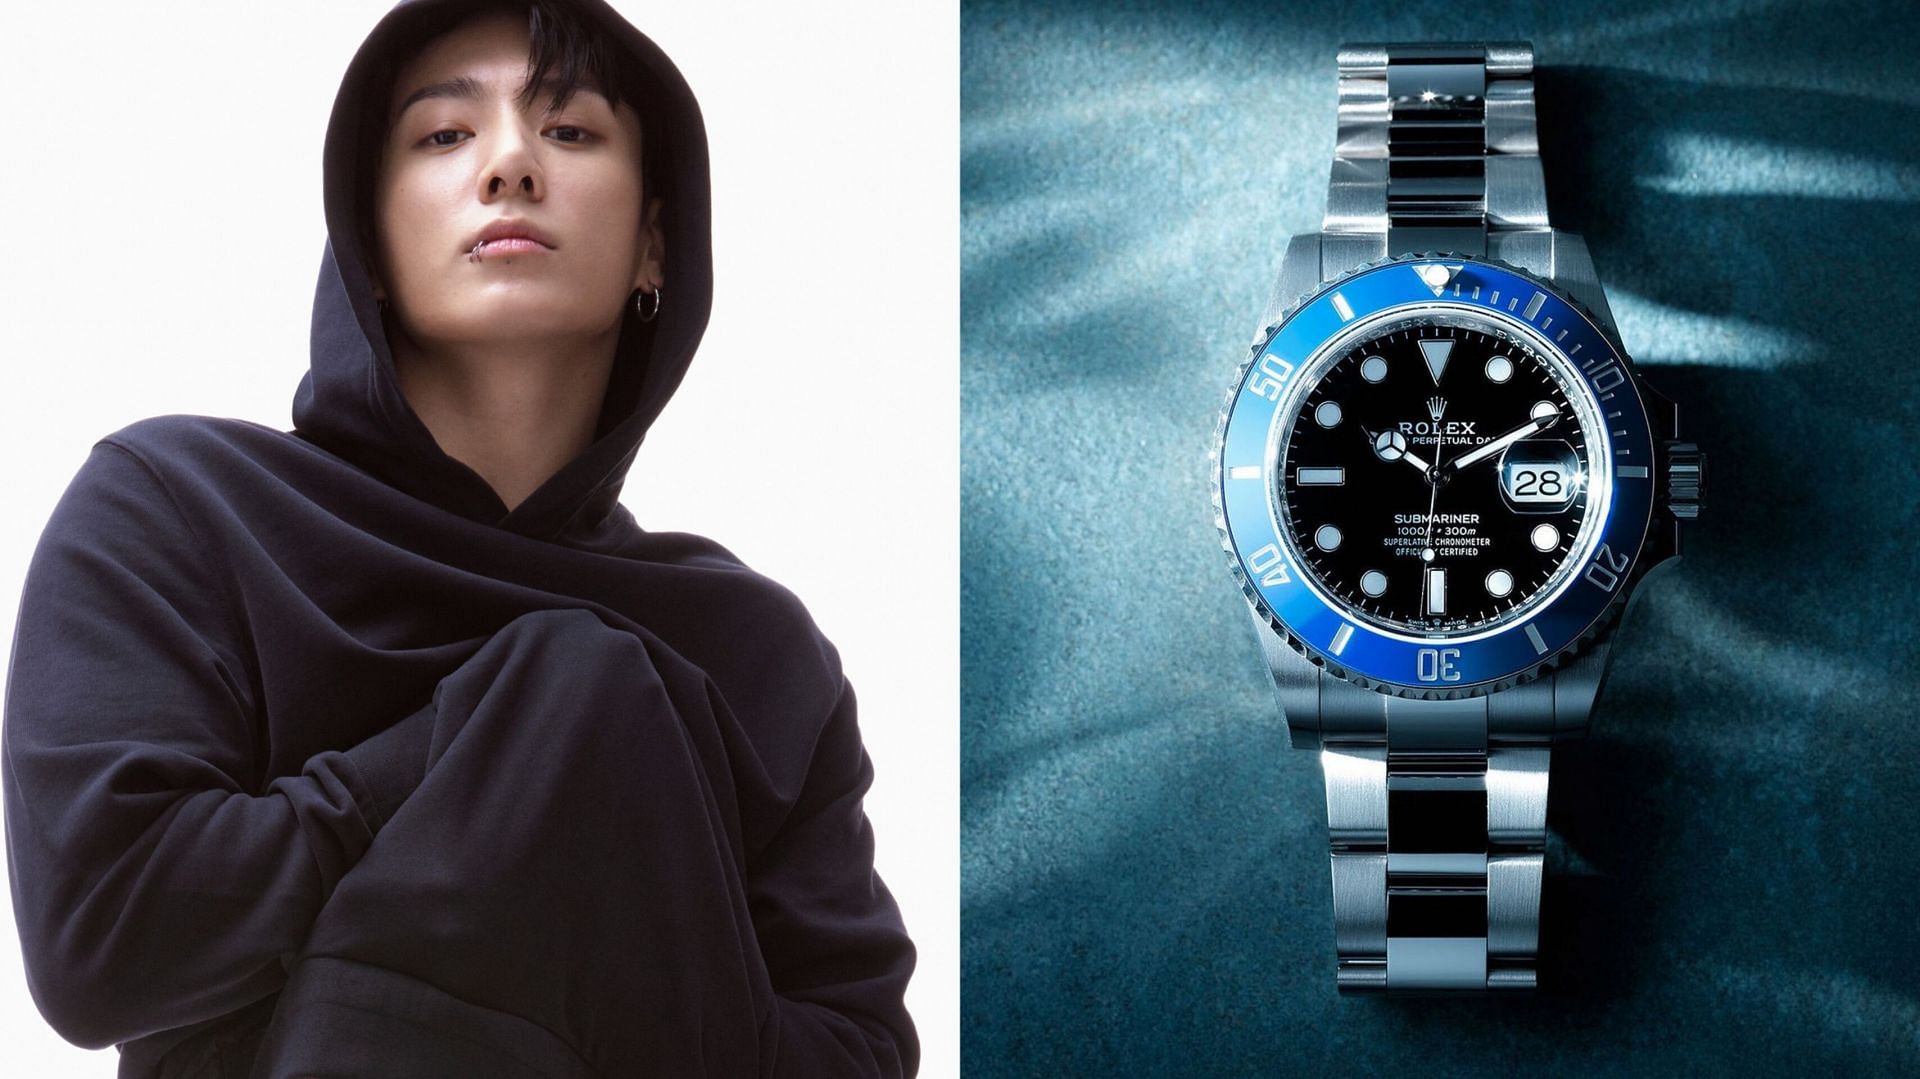 Jungkook owns impressive collection of Rolex watches (Image via Calvin Klein/Twitter and Rolex/Instagram)